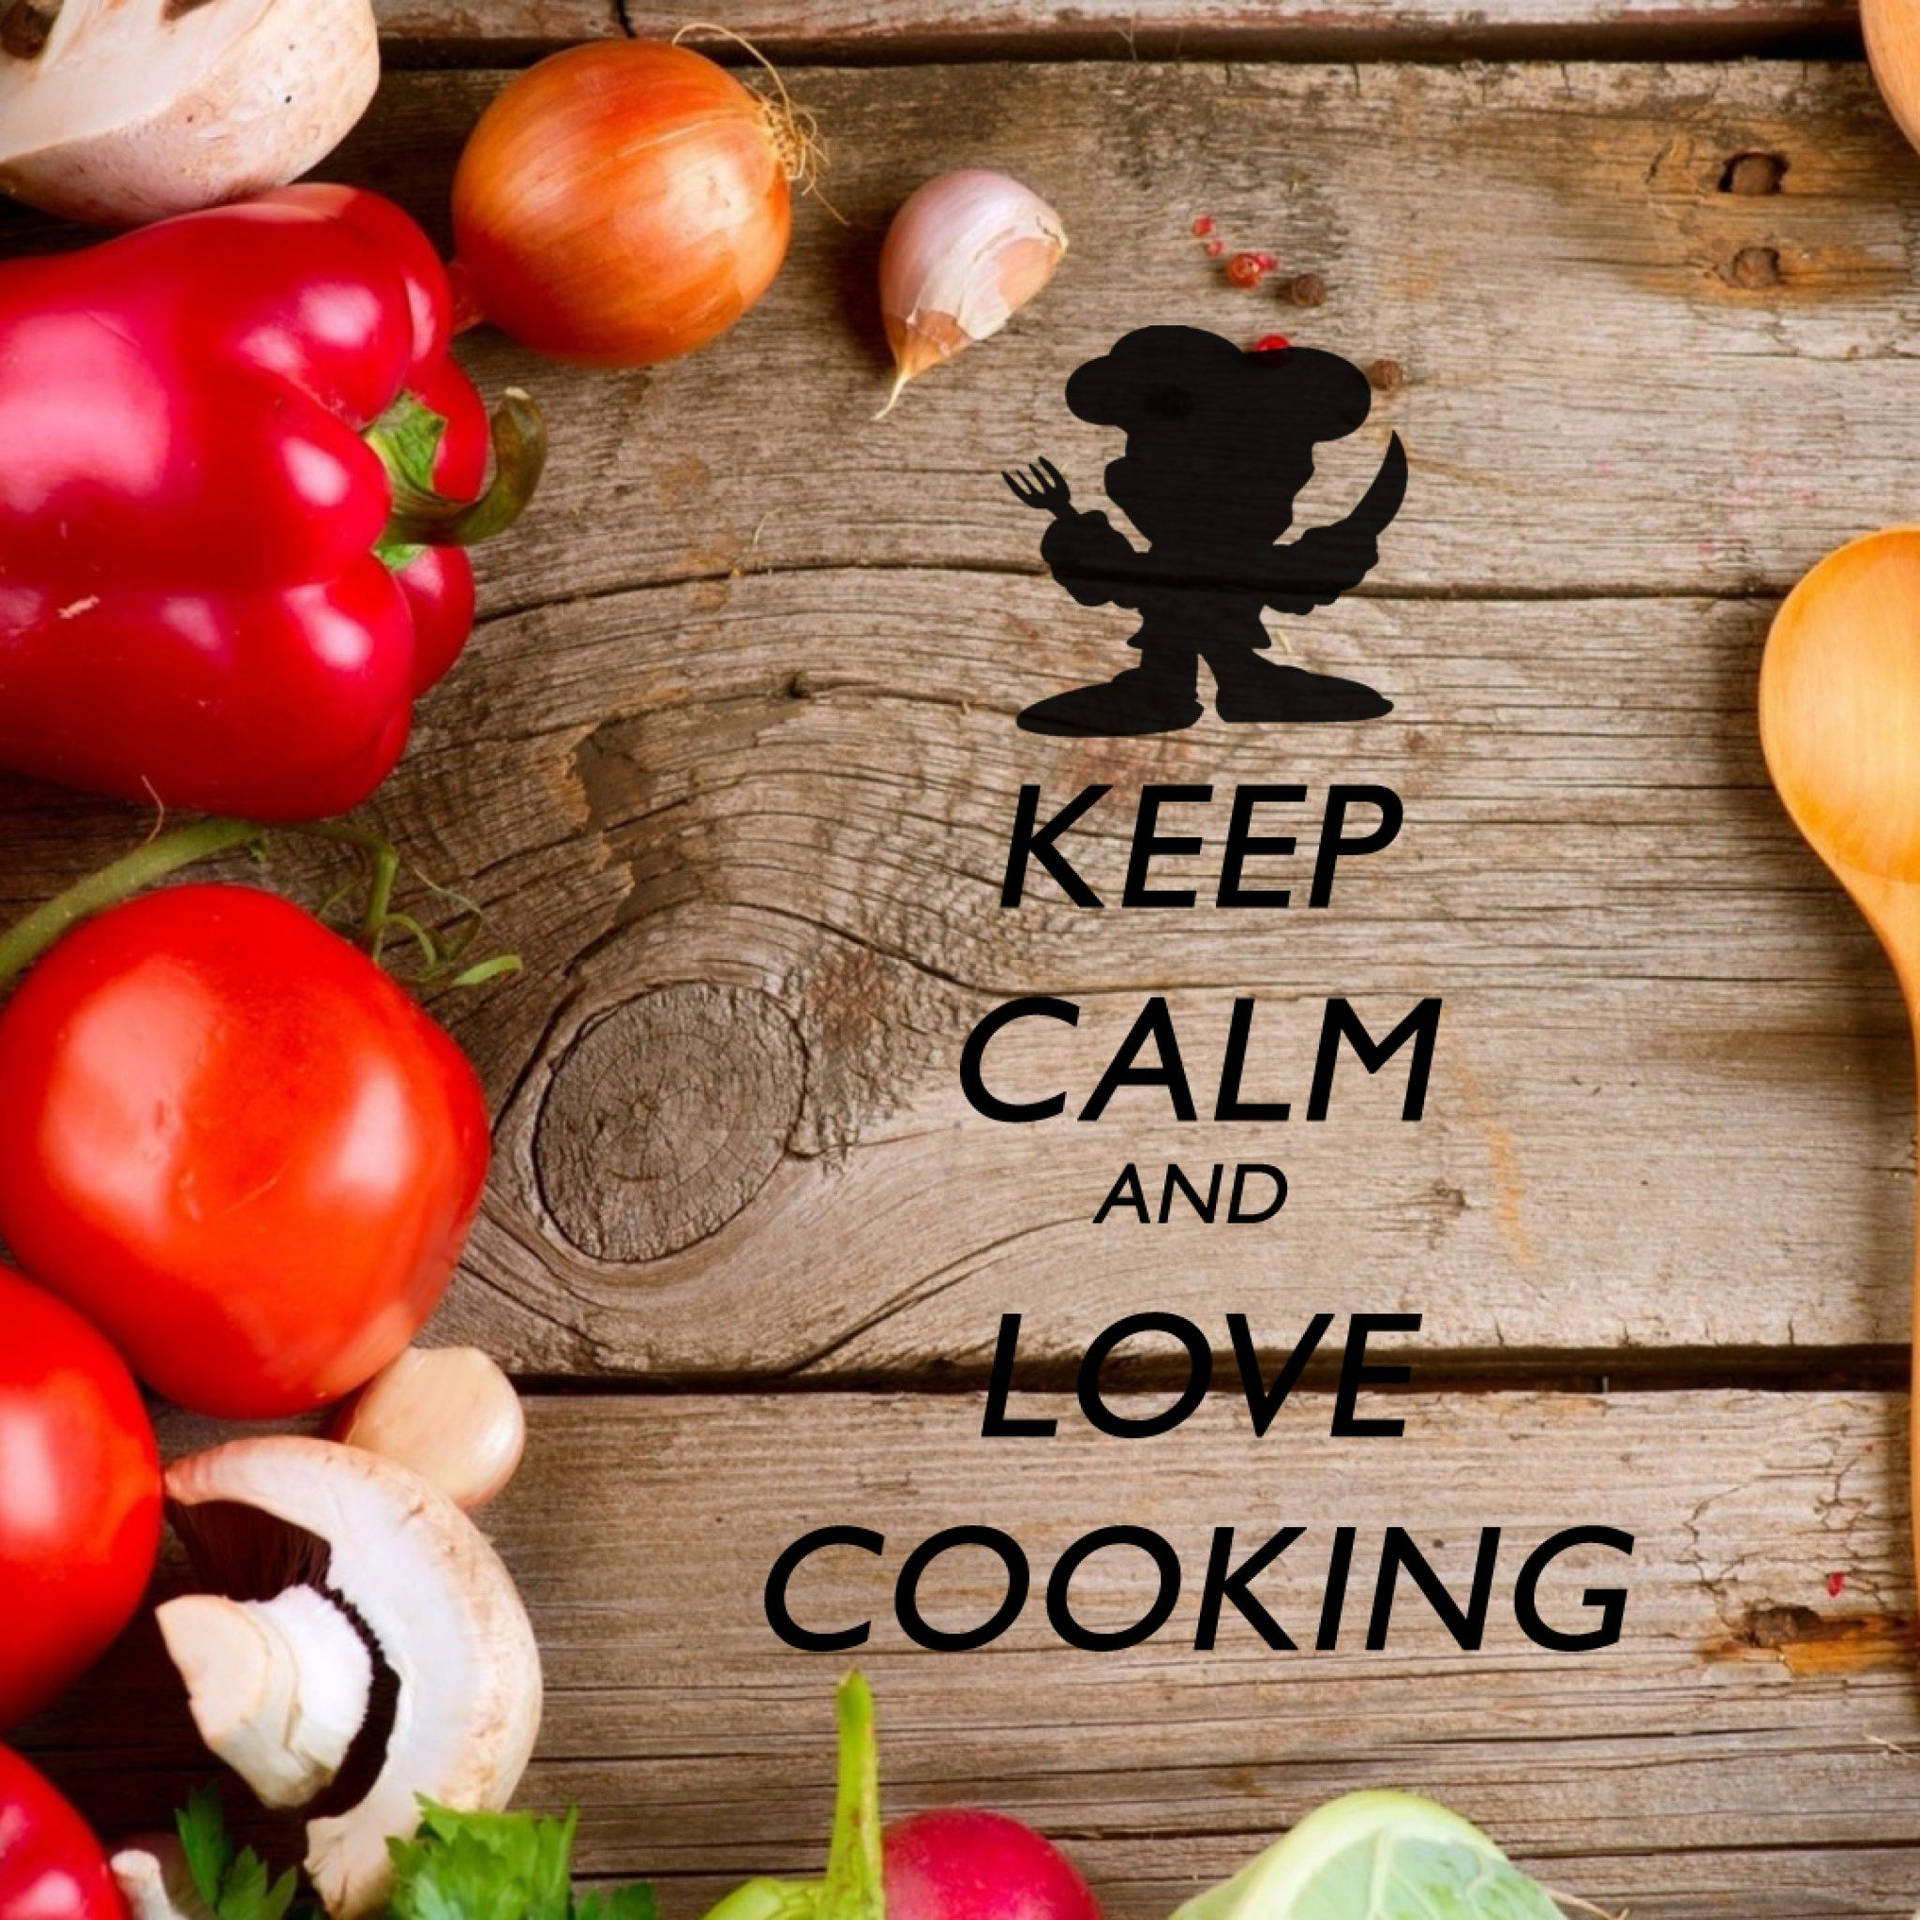 Keep calm and love cooking wallpaper.